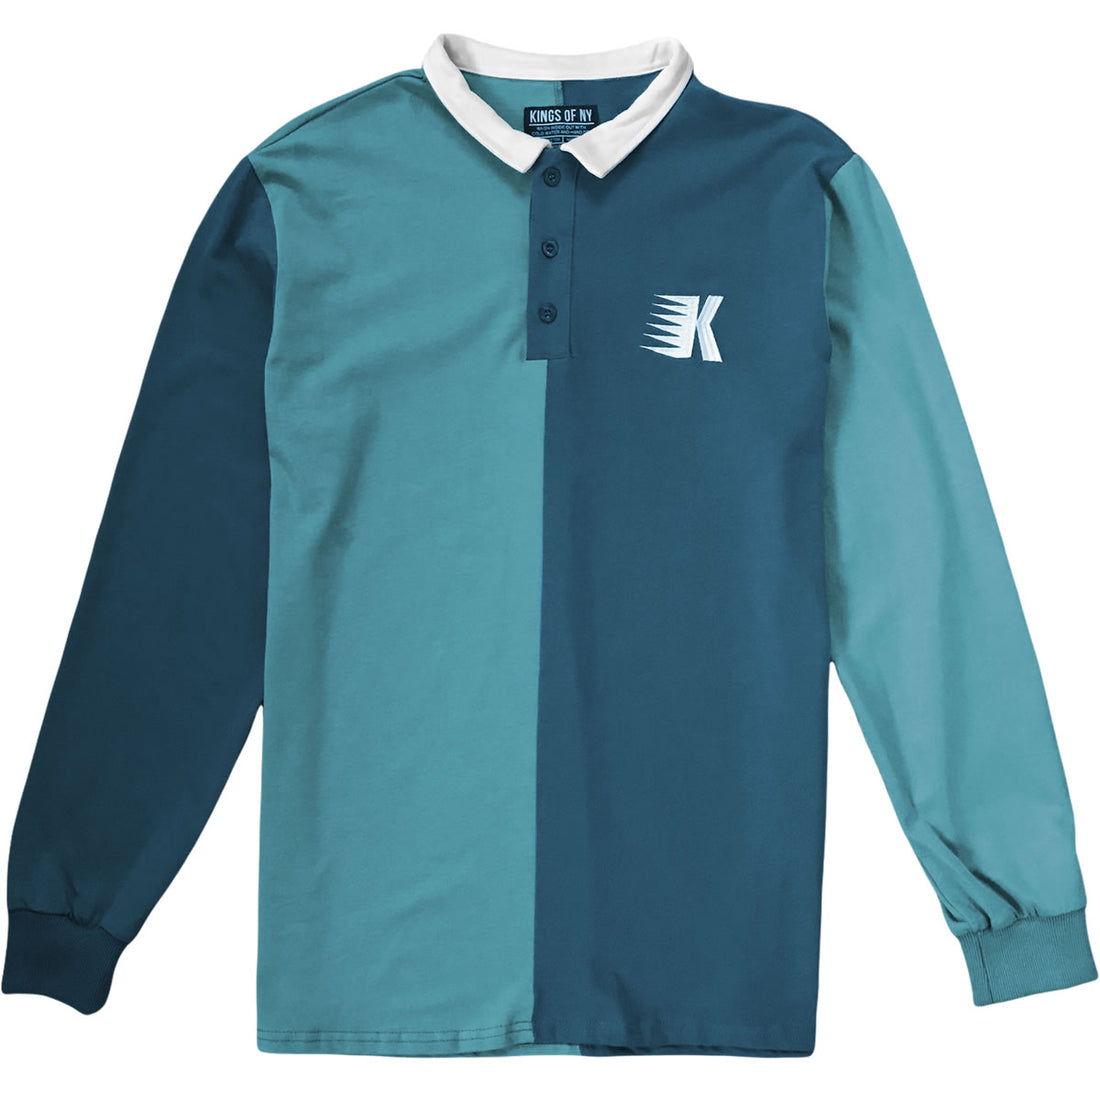 Dusty Blue And Light Blue Two Tone Split Long Sleeve Rugby Shirt